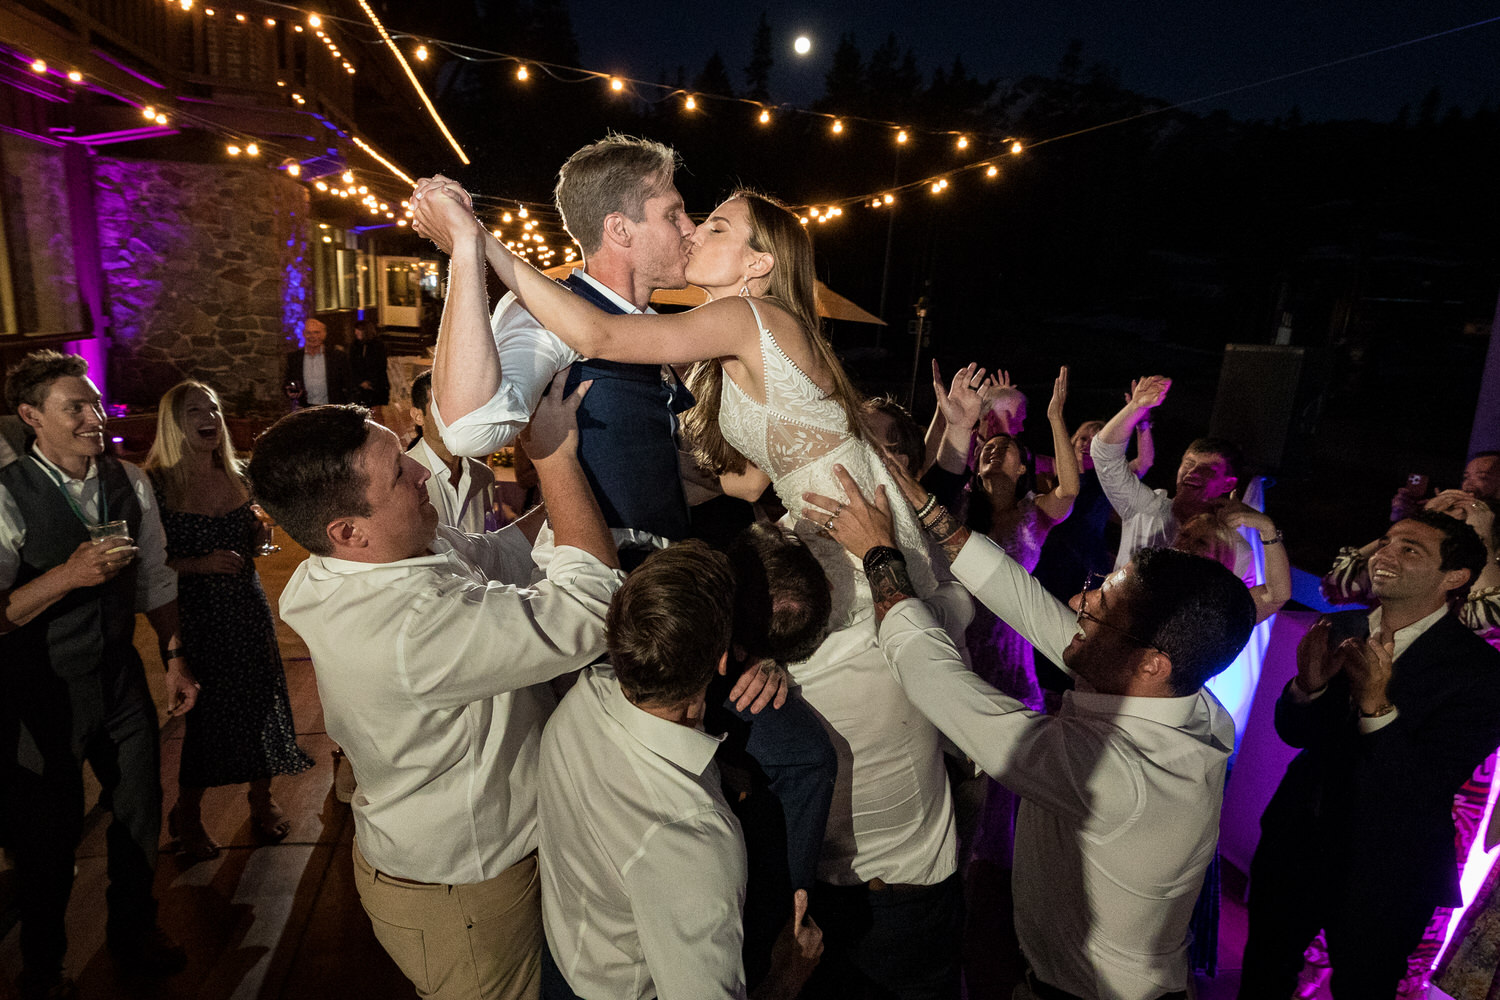 Wedding guests lift the bride and groom on their shoulders for a memorable wedding kiss.